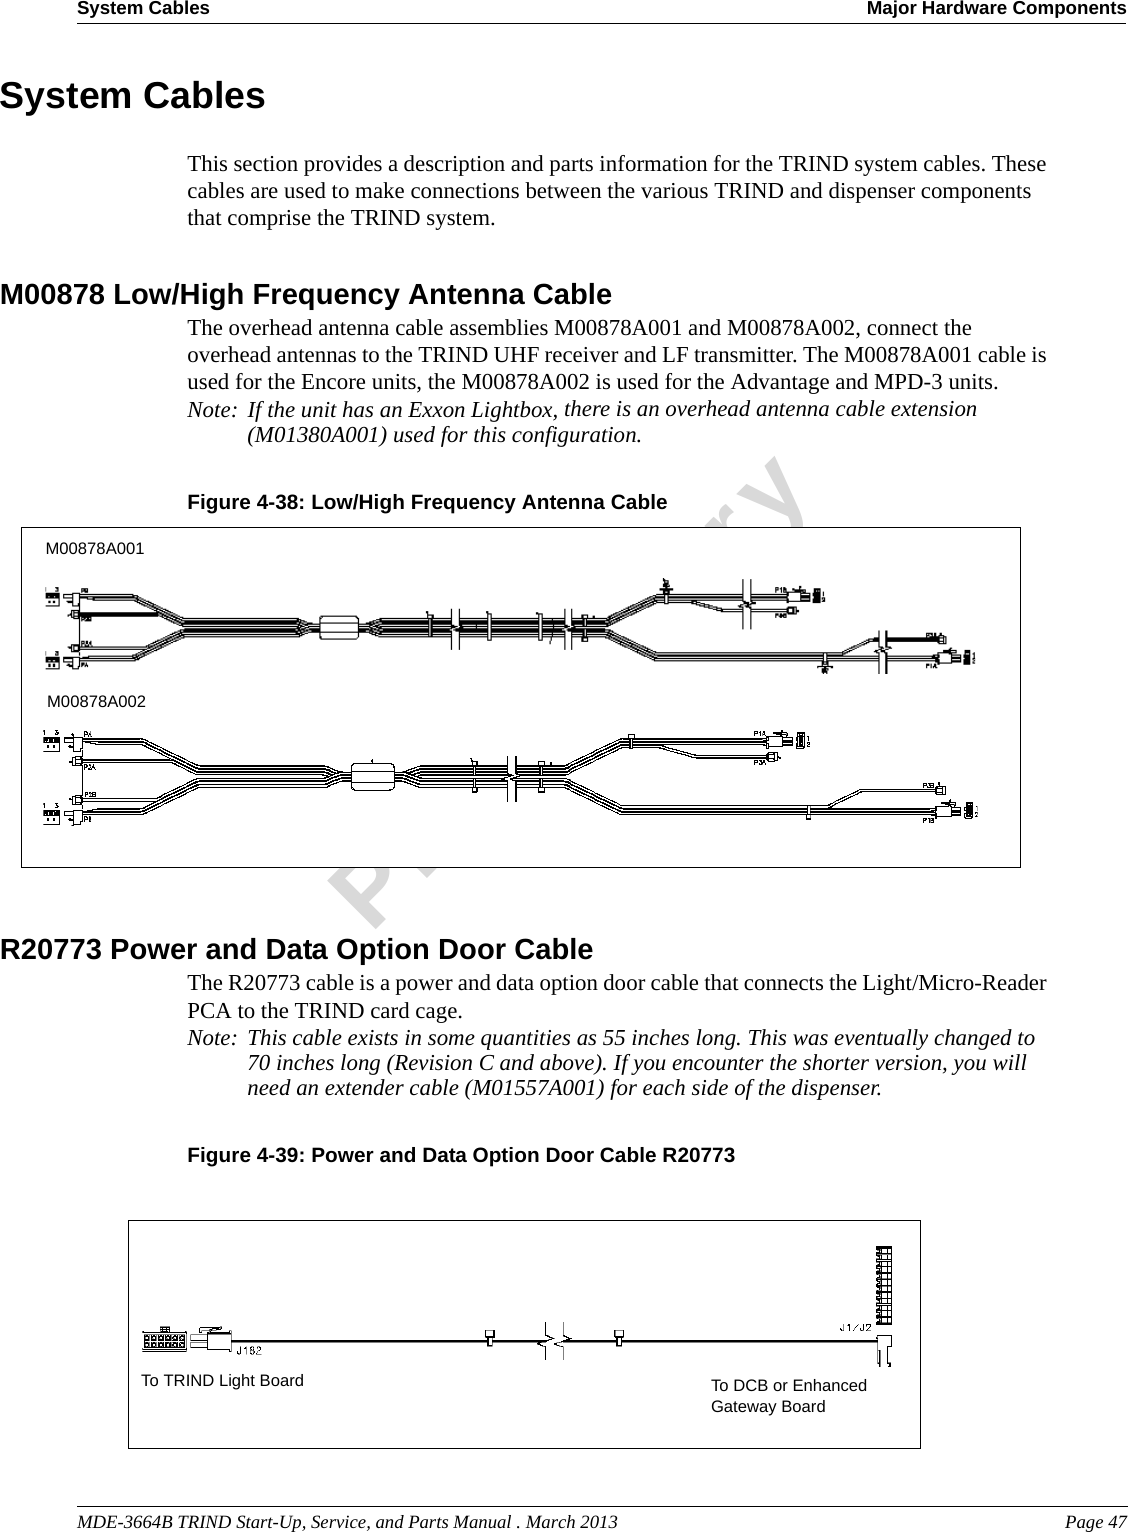 MDE-3664B TRIND Start-Up, Service, and Parts Manual . March 2013 Page 47System Cables Major Hardware ComponentsPreliminarySystem CablesThis section provides a description and parts information for the TRIND system cables. These cables are used to make connections between the various TRIND and dispenser components that comprise the TRIND system.M00878 Low/High Frequency Antenna CableThe overhead antenna cable assemblies M00878A001 and M00878A002, connect the overhead antennas to the TRIND UHF receiver and LF transmitter. The M00878A001 cable is used for the Encore units, the M00878A002 is used for the Advantage and MPD-3 units. Note: If the unit has an Exxon Lightbox, there is an overhead antenna cable extension (M01380A001) used for this configuration.Figure 4-38: M00878A001M00878A002Low/High Frequency Antenna CableR20773 Power and Data Option Door Cable The R20773 cable is a power and data option door cable that connects the Light/Micro-Reader PCA to the TRIND card cage. Note: This cable exists in some quantities as 55 inches long. This was eventually changed to 70 inches long (Revision C and above). If you encounter the shorter version, you will need an extender cable (M01557A001) for each side of the dispenser. Figure 4-39: Power and Data Option Door Cable R20773To DCB or Enhanced Gateway BoardTo TRIND Light Board